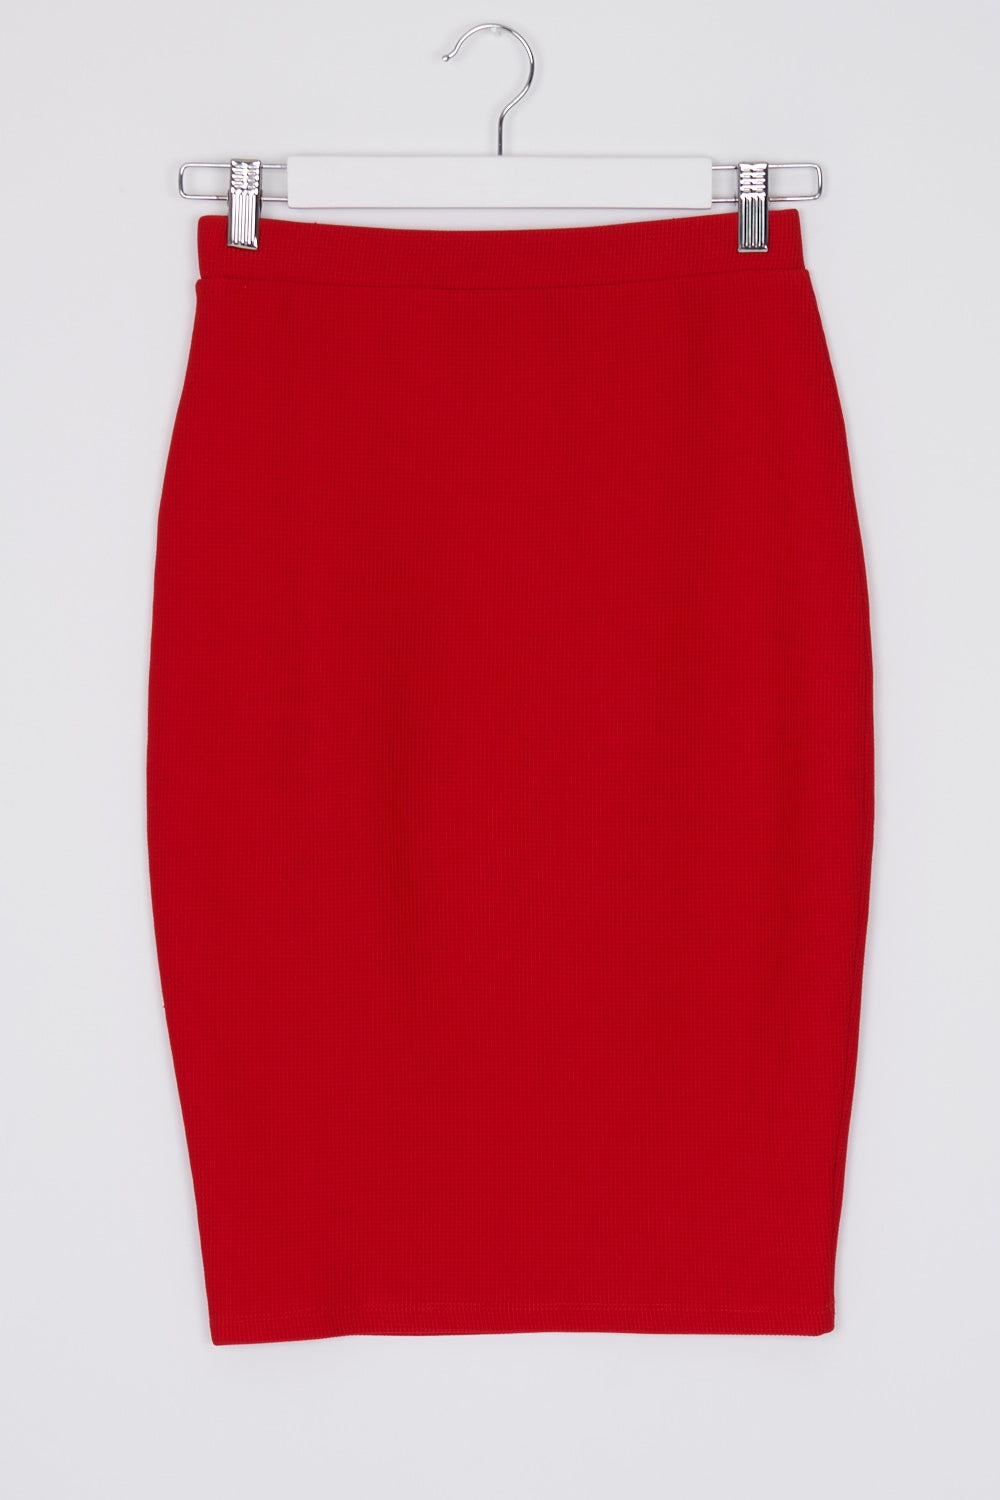 Atmos & Here Red Pencil Skirt 8